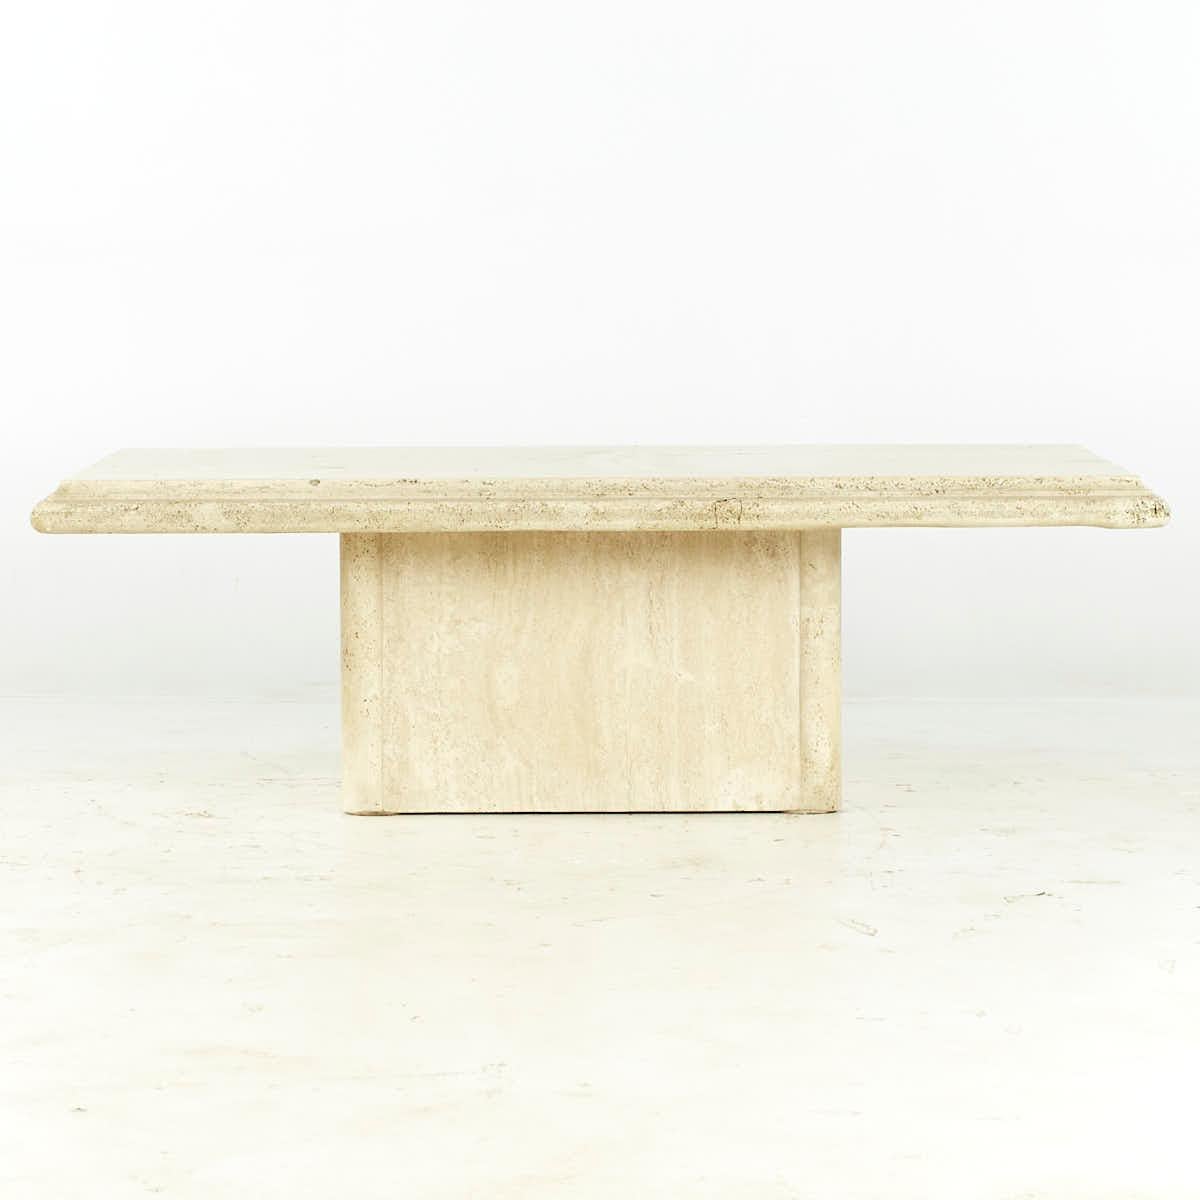 Mid Century Travertine Coffee Table

This coffee table measures: 51 wide x 27.75 deep x 16 inches high

All pieces of furniture can be had in what we call restored vintage condition. That means the piece is restored upon purchase so it’s free of